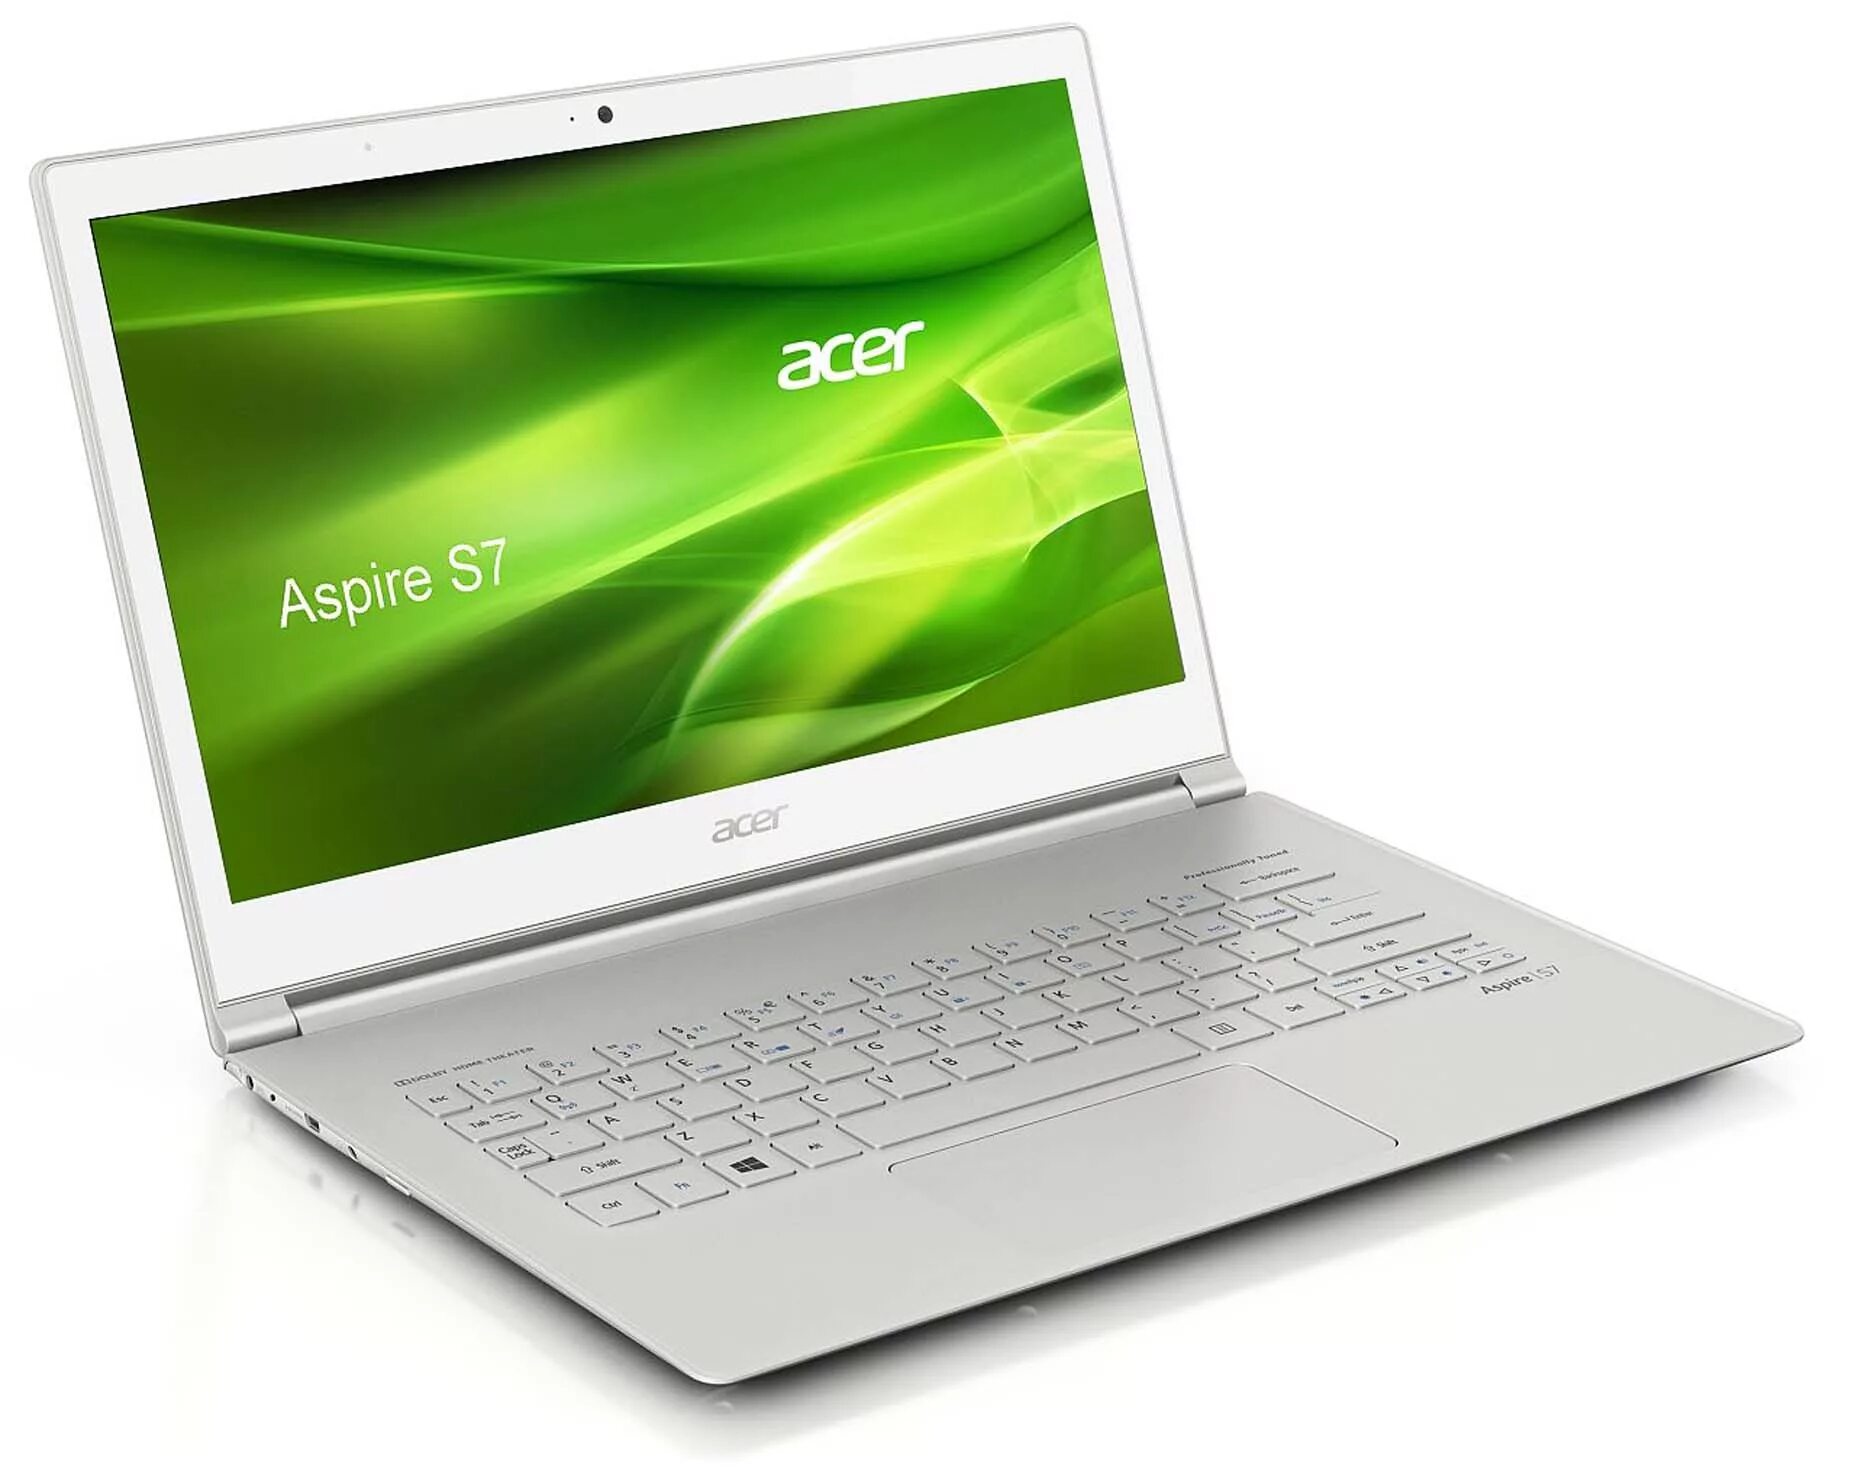 Acer update. Acer Aspire s7 SSD. Ноутбук Acer Aspire s7-392-74508g25t. Acer Aspire 7736 Windows 8. Acer Aspire s1.